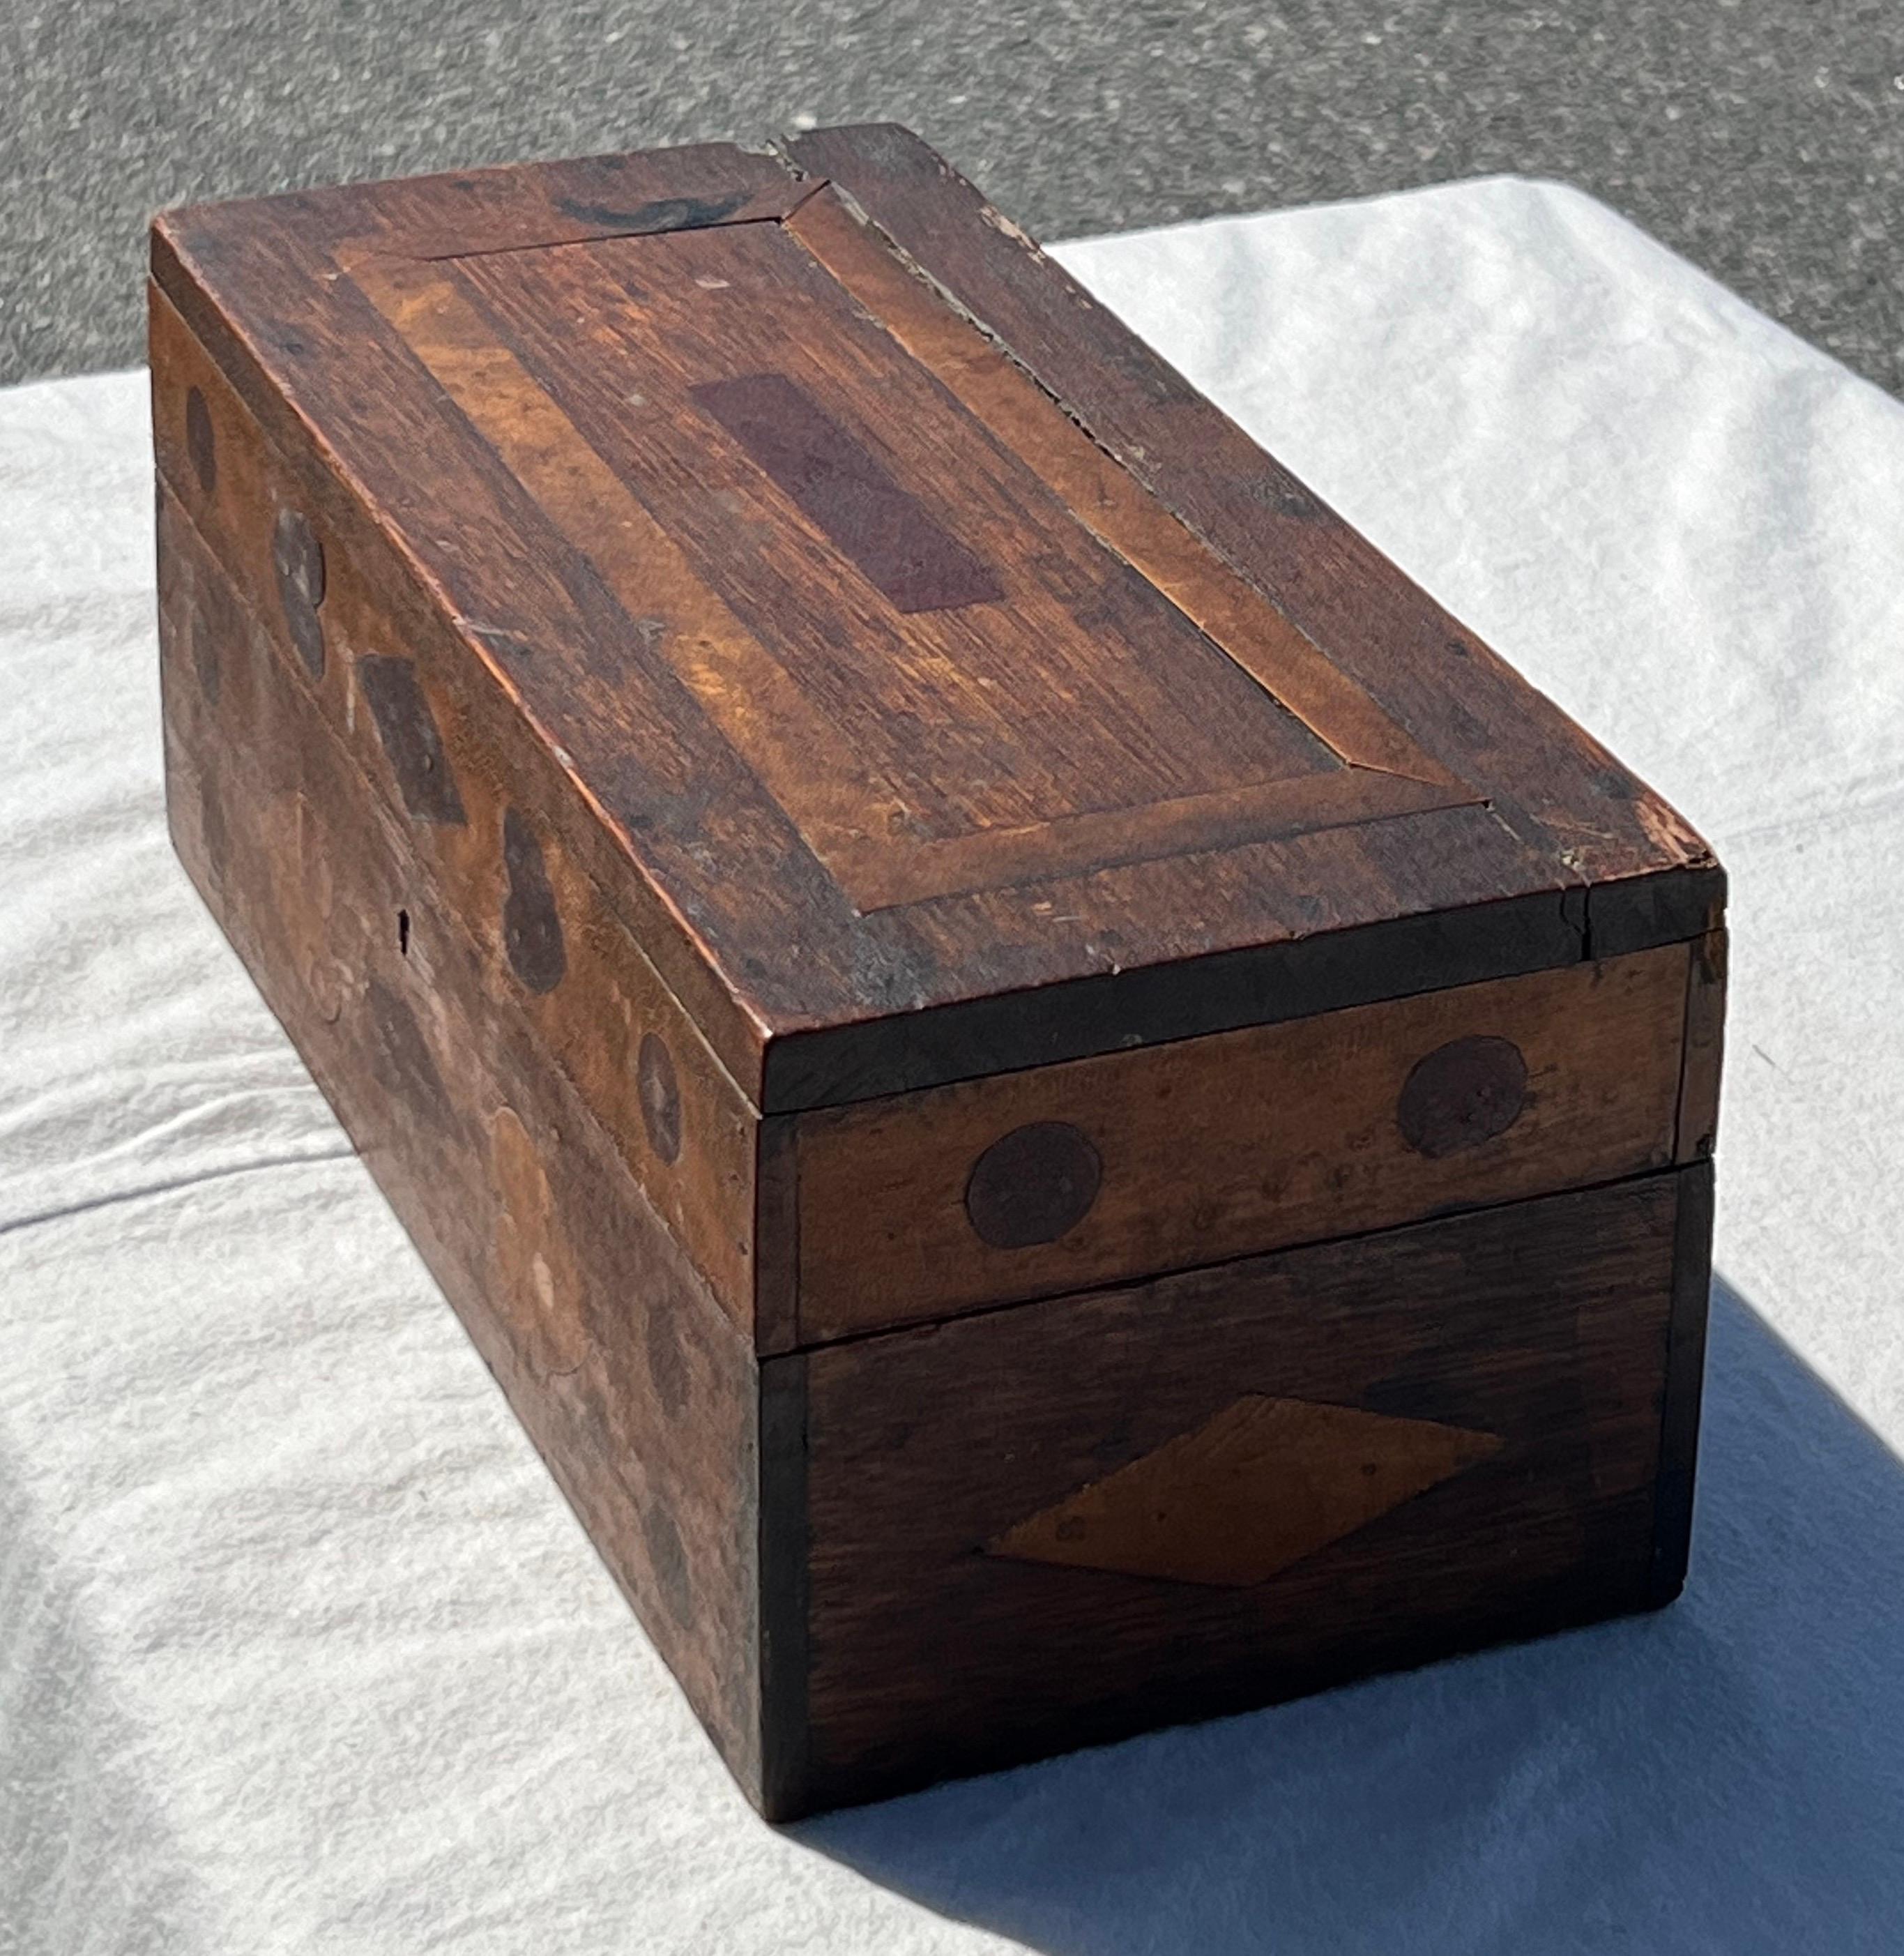 Hand-Crafted 19th Century Wooden Box with Inlaid Decoration For Sale